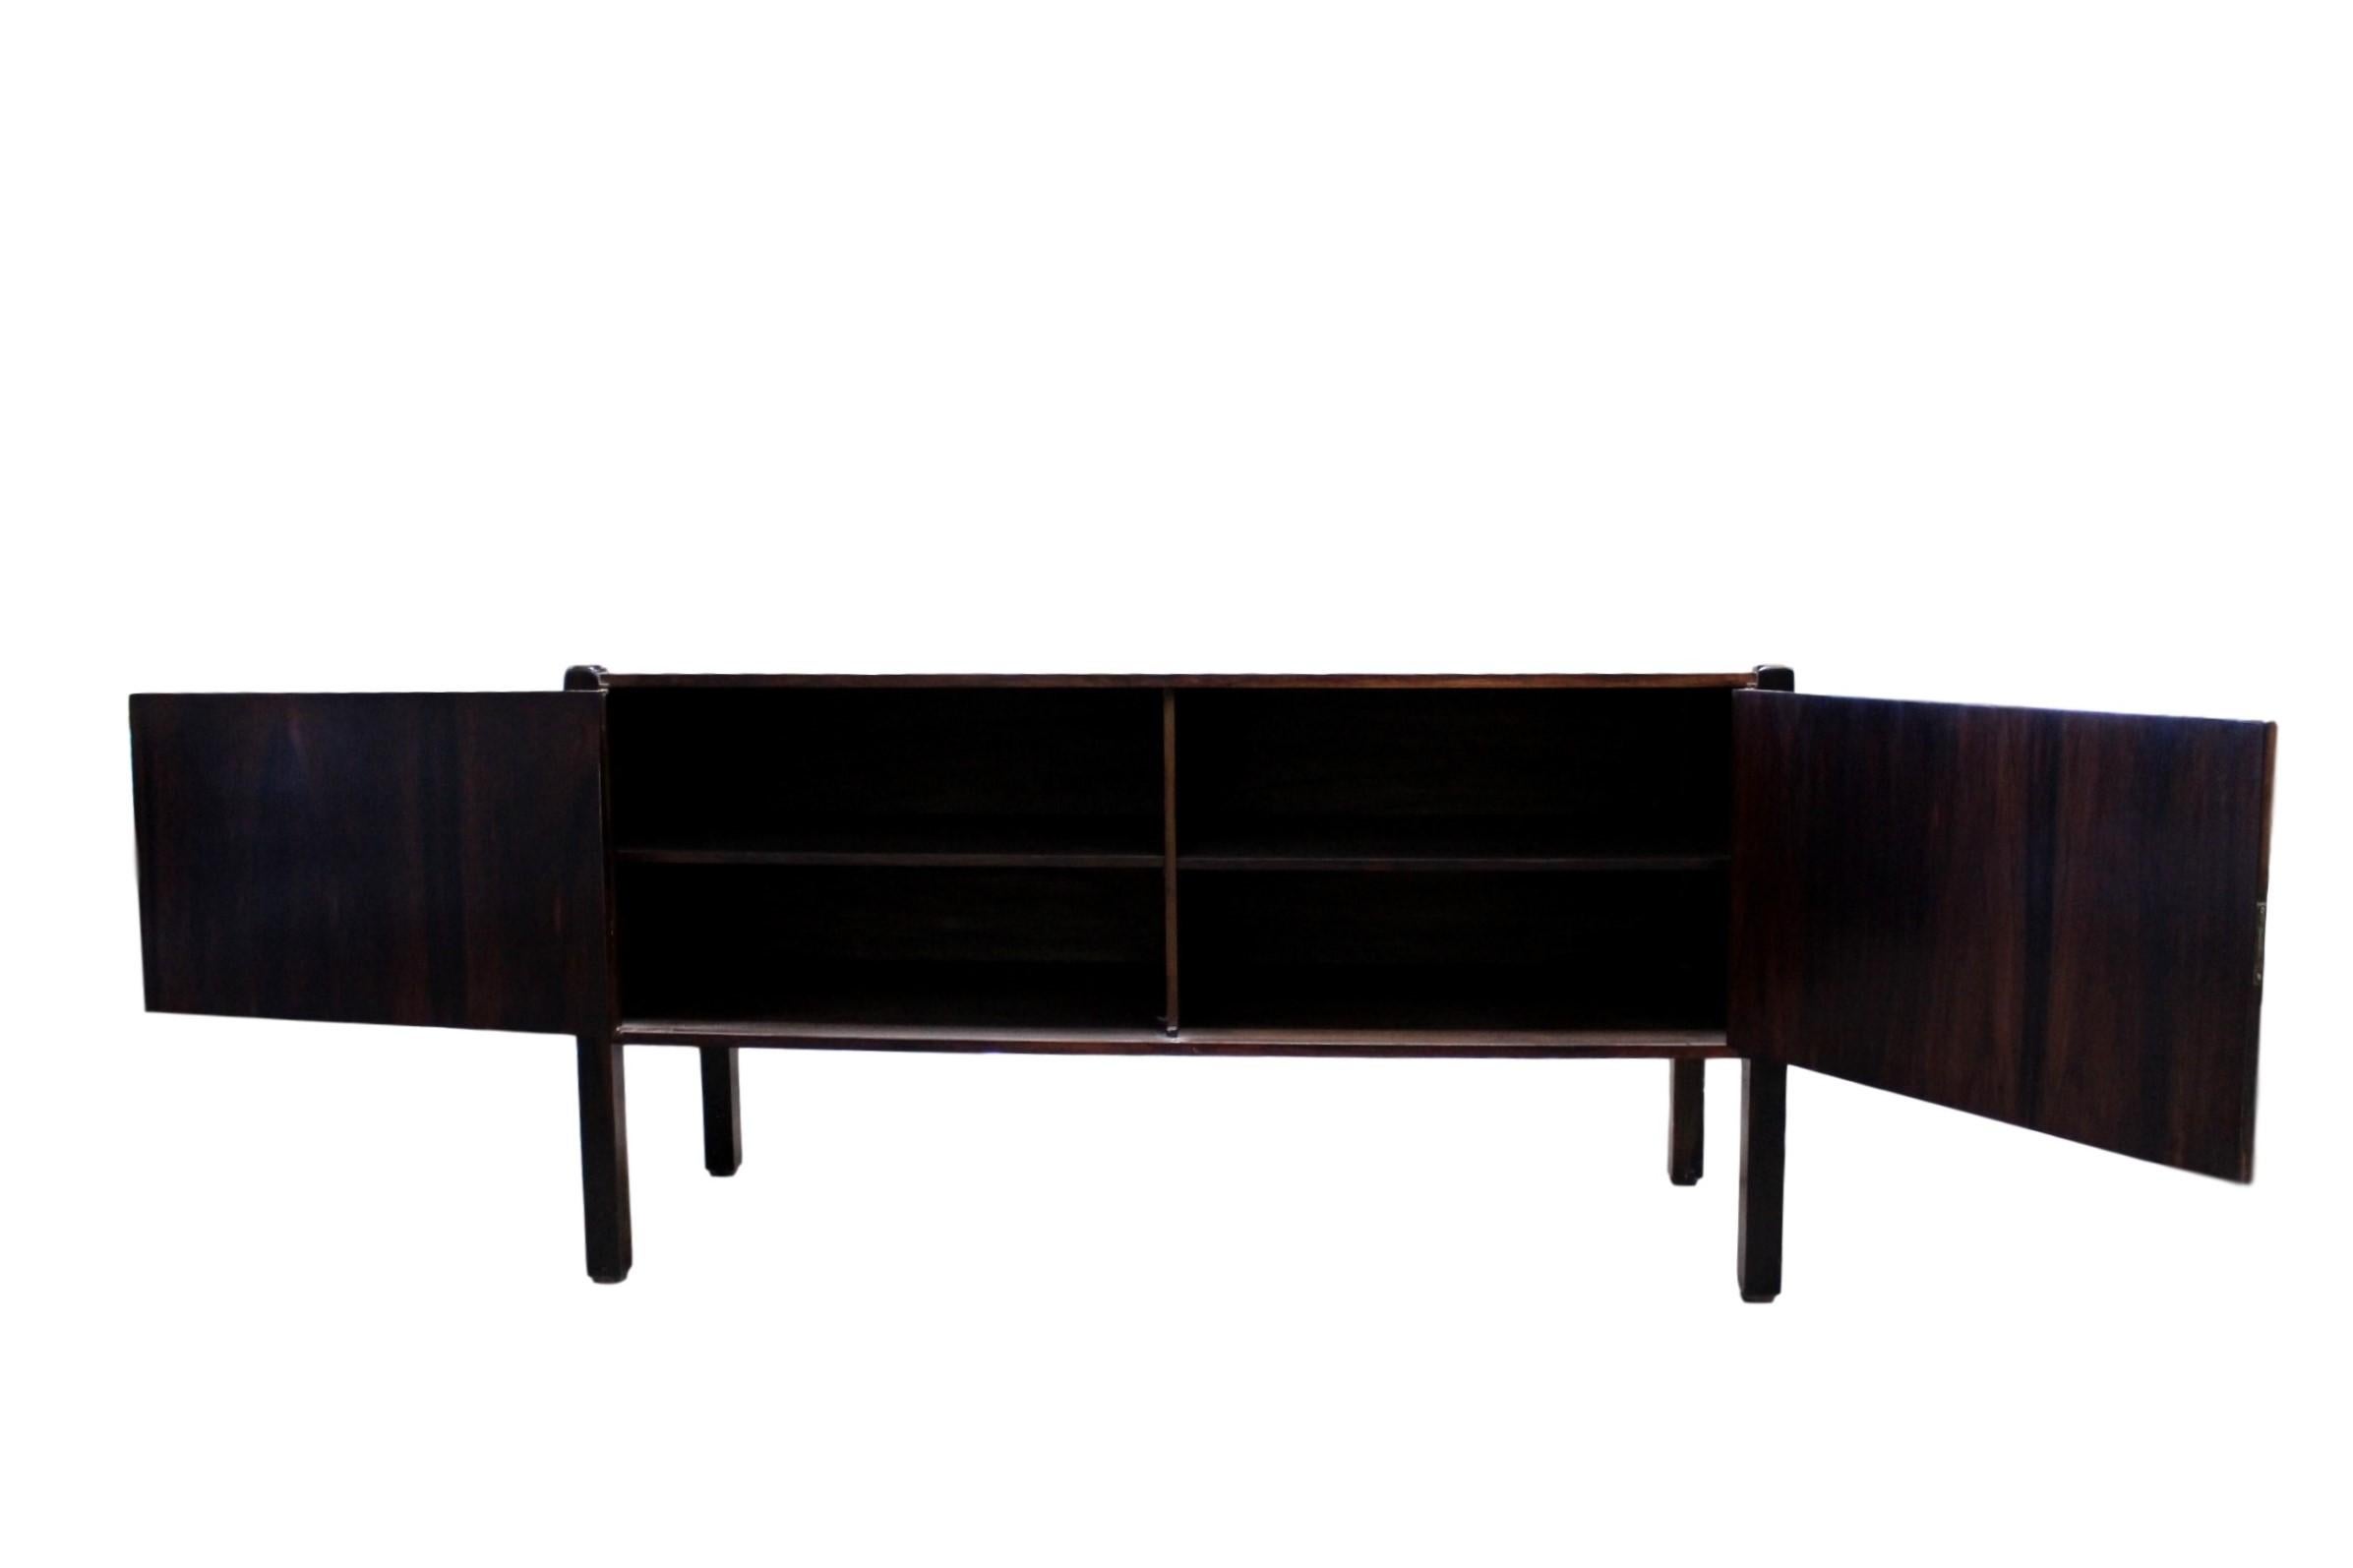 Sergio Rodrigues, Credenza Luciana, Sideboard Luciana, 1960s In Good Condition For Sale In Houston, TX